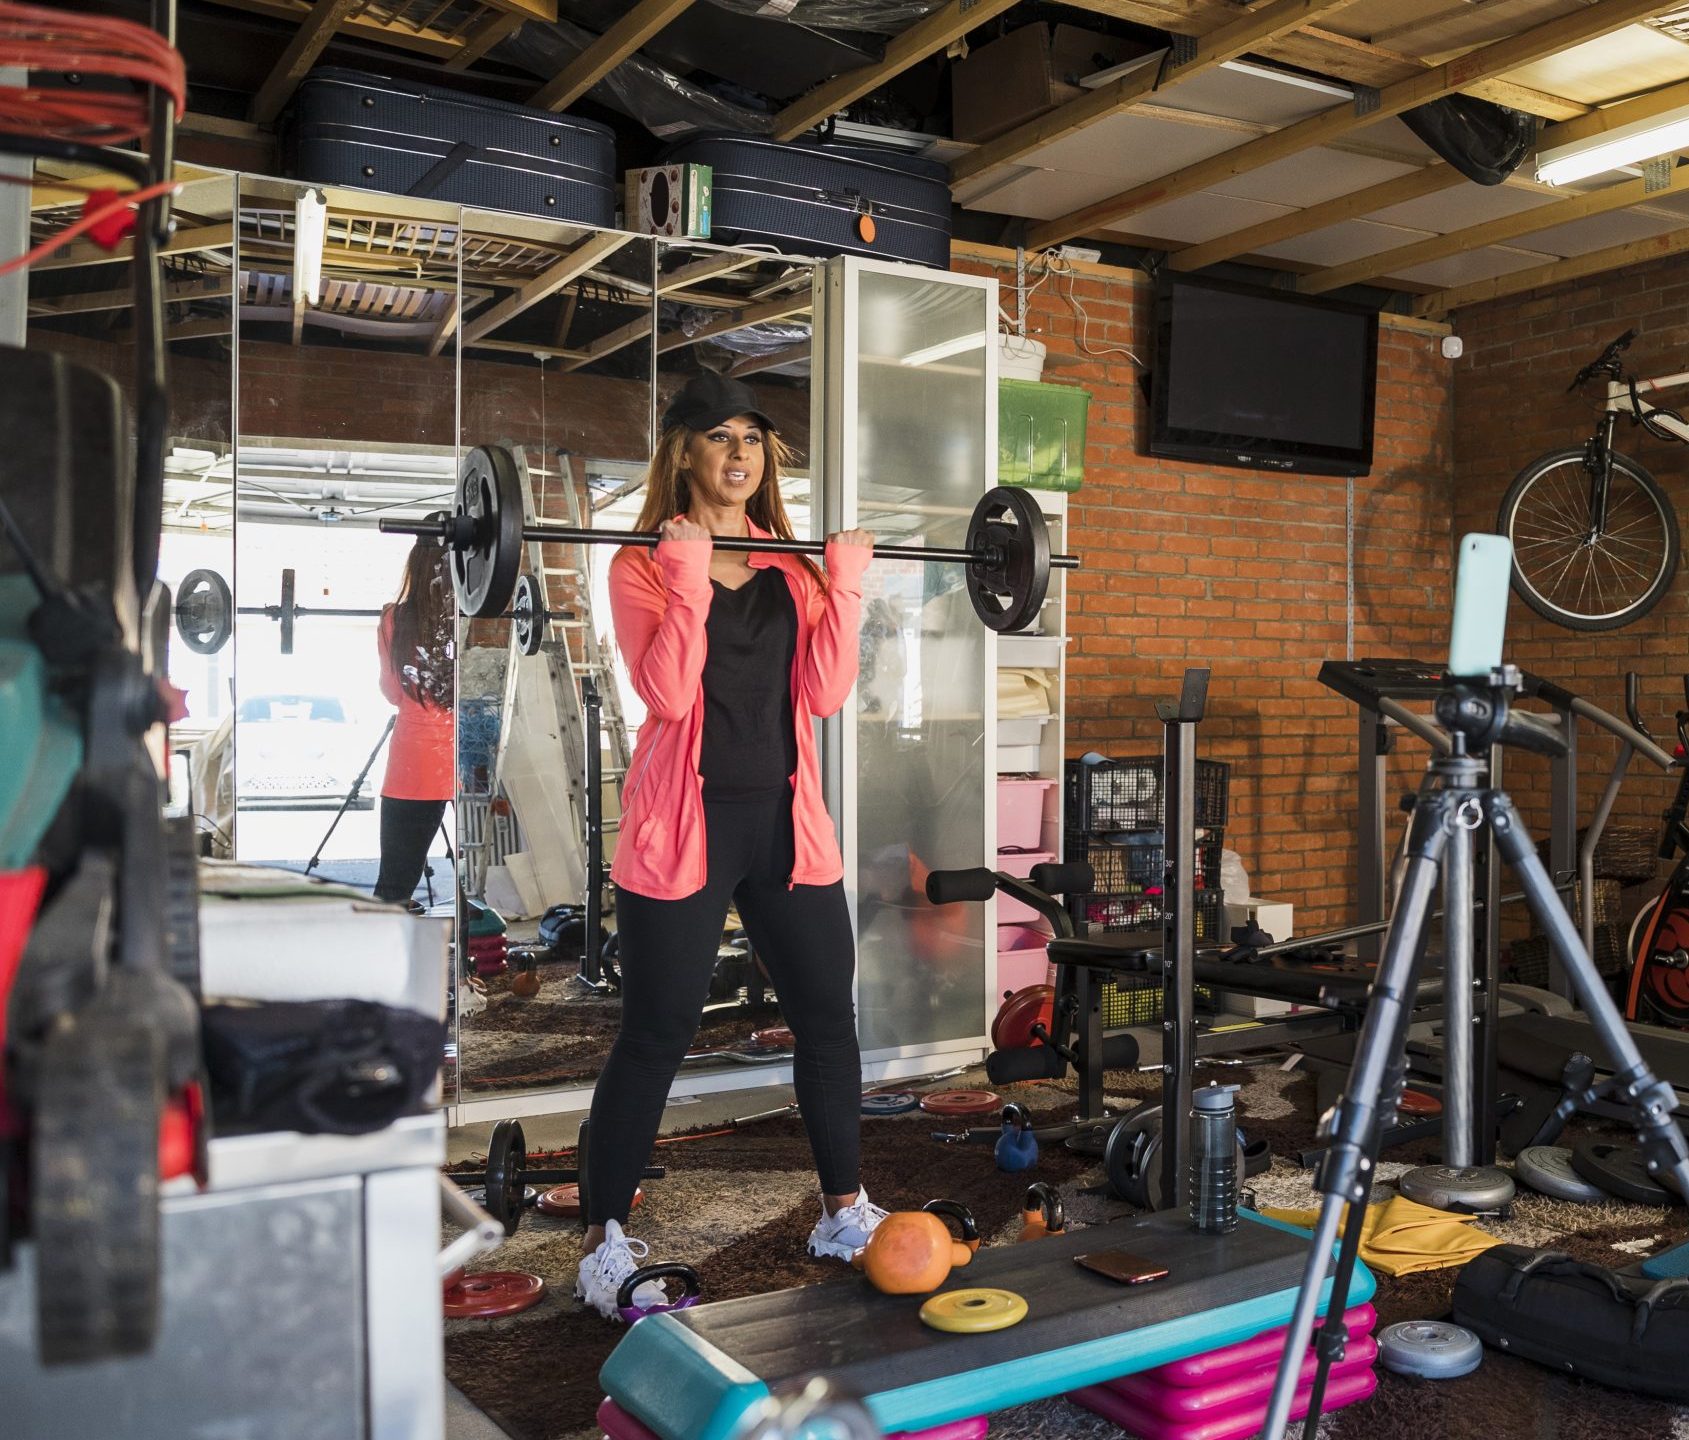 South Asian woman aged 45-55 weightlifting in her garage